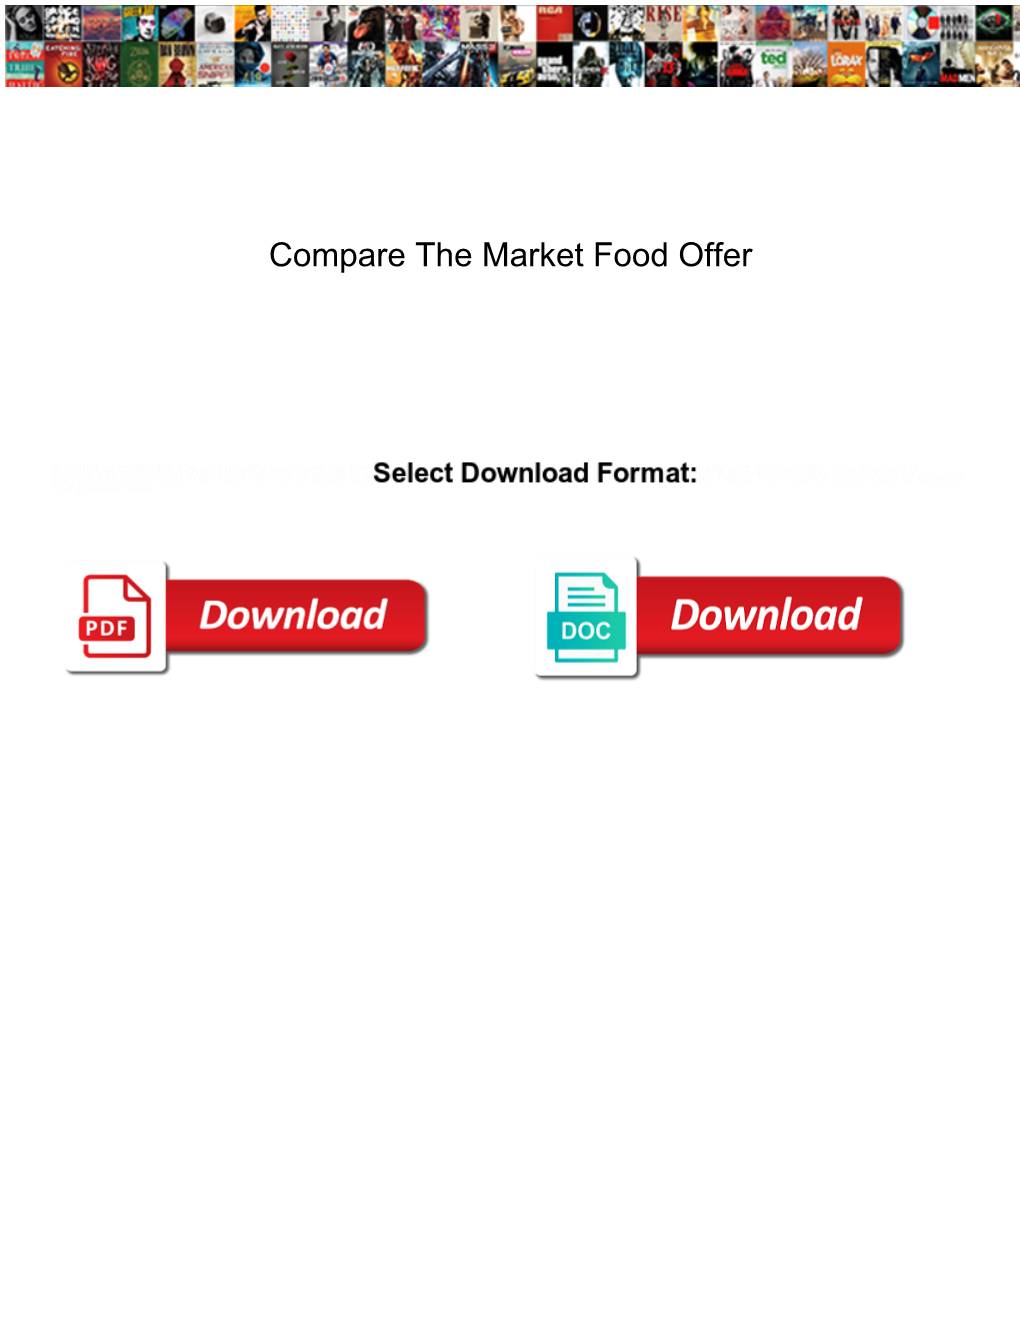 Compare the Market Food Offer